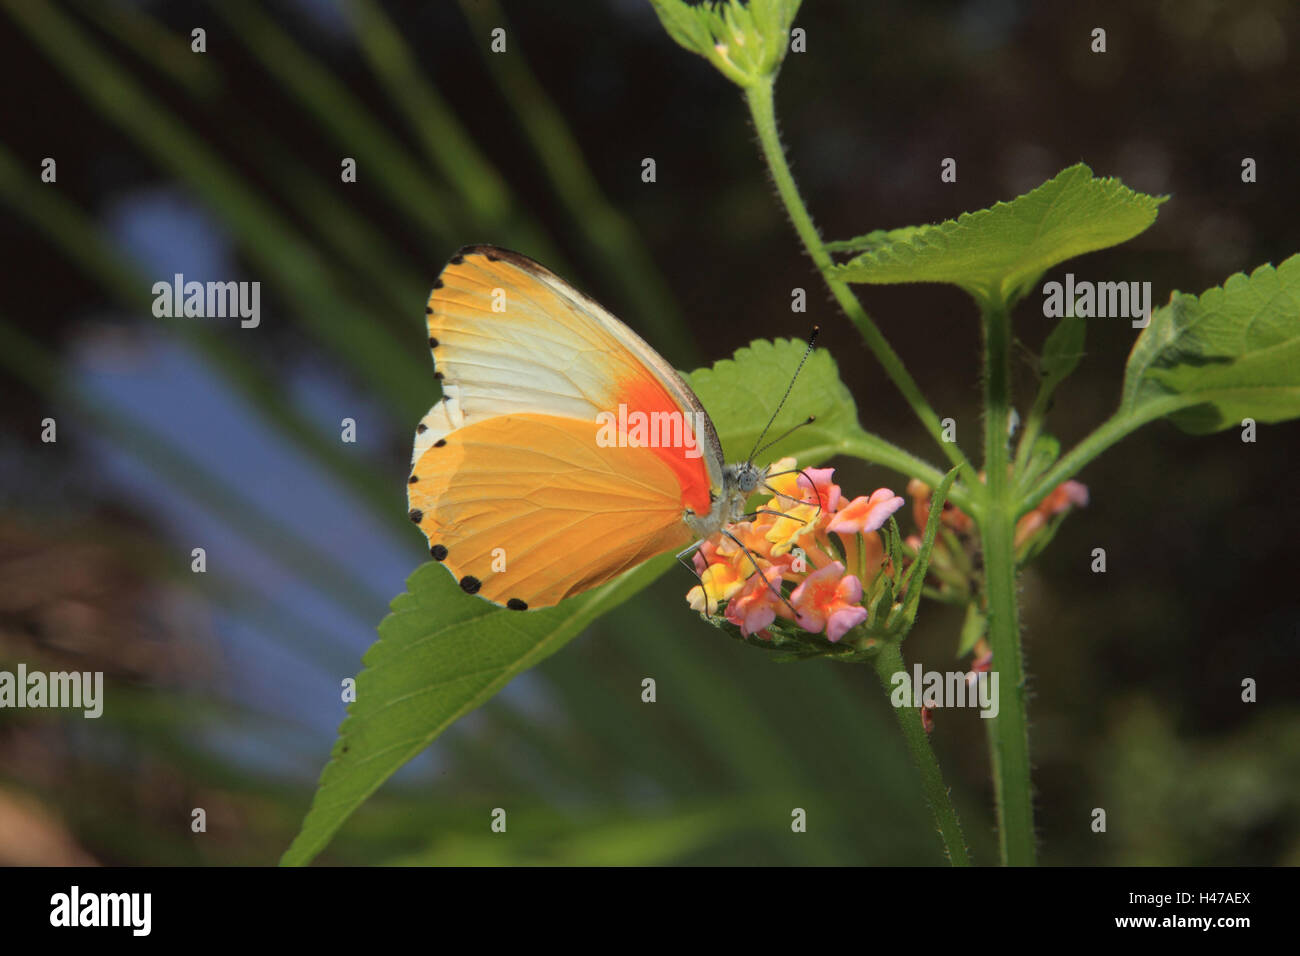 Butterfly, Belenois thysa, blossom, Stock Photo